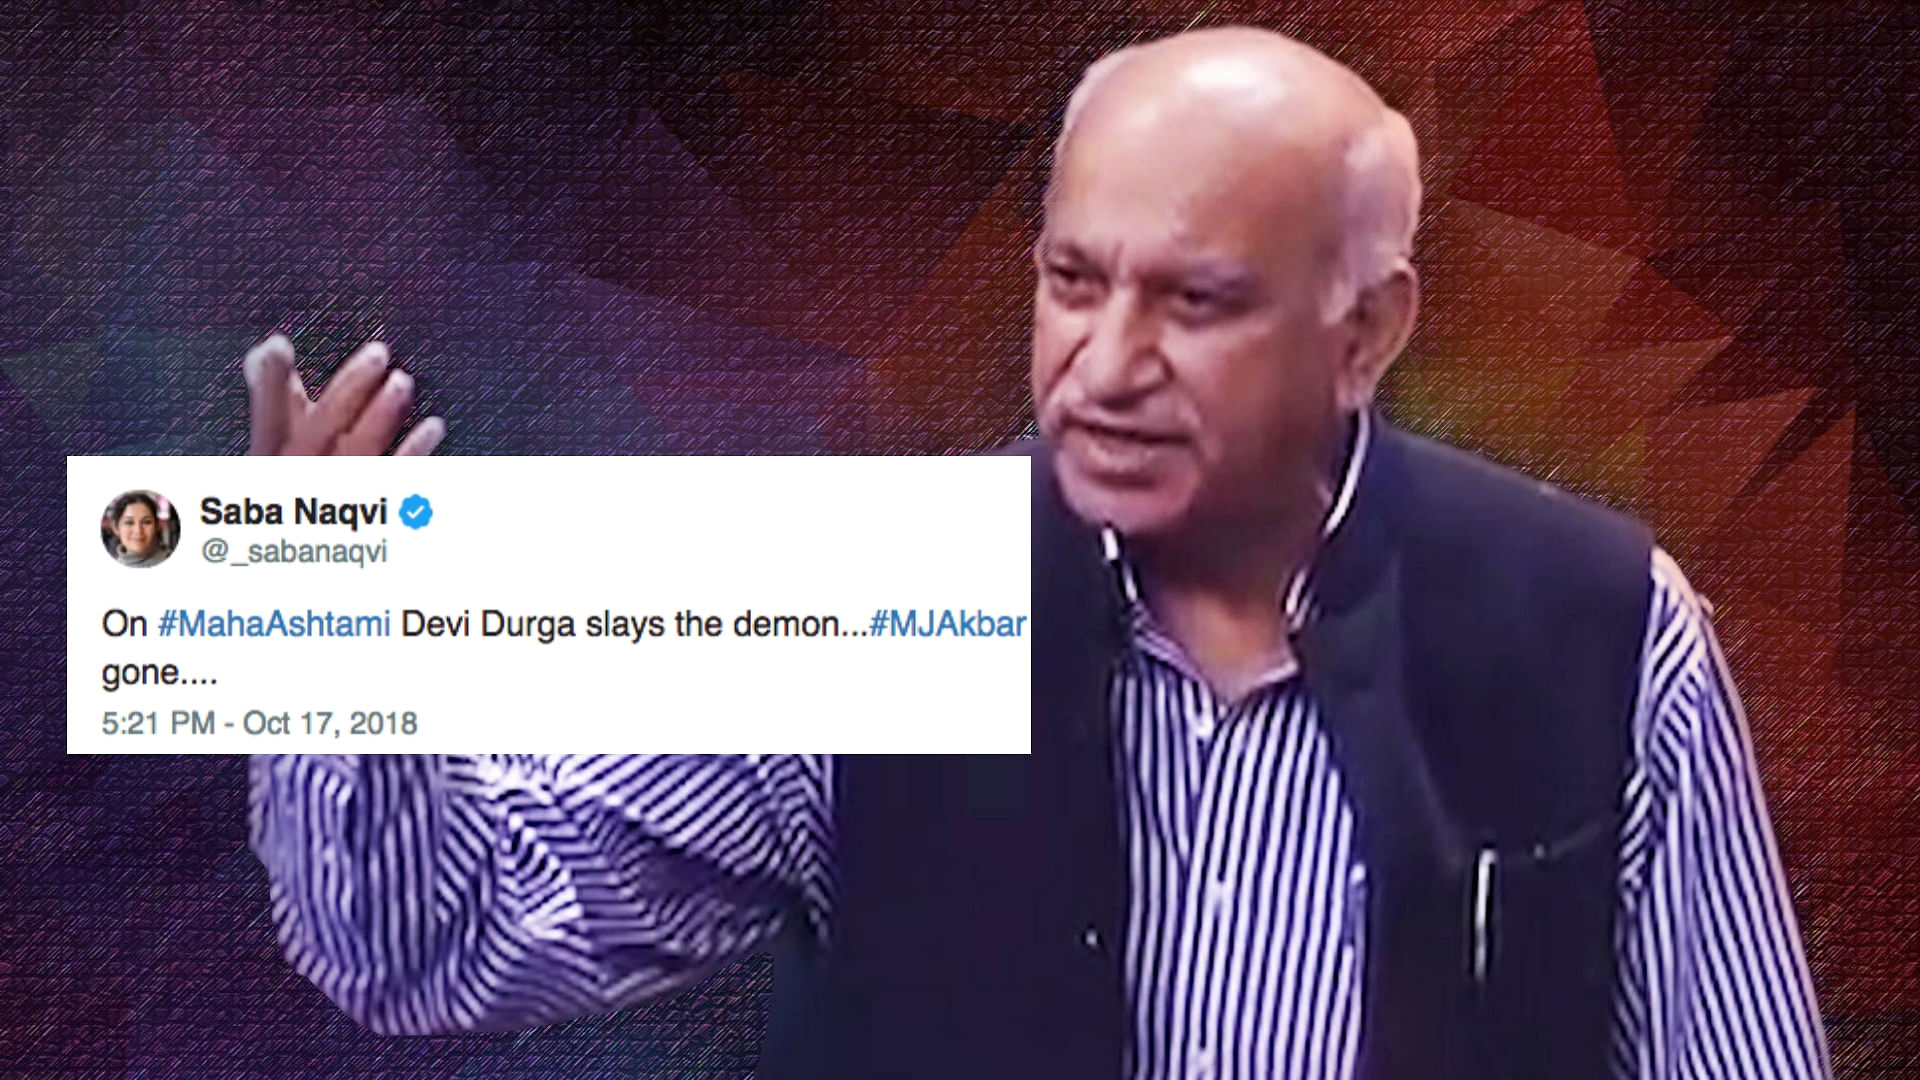 The news of MJ Akbar’s resignation led to celebrations on Twitter as netizens termed it the ‘triumph of #MeToo’.